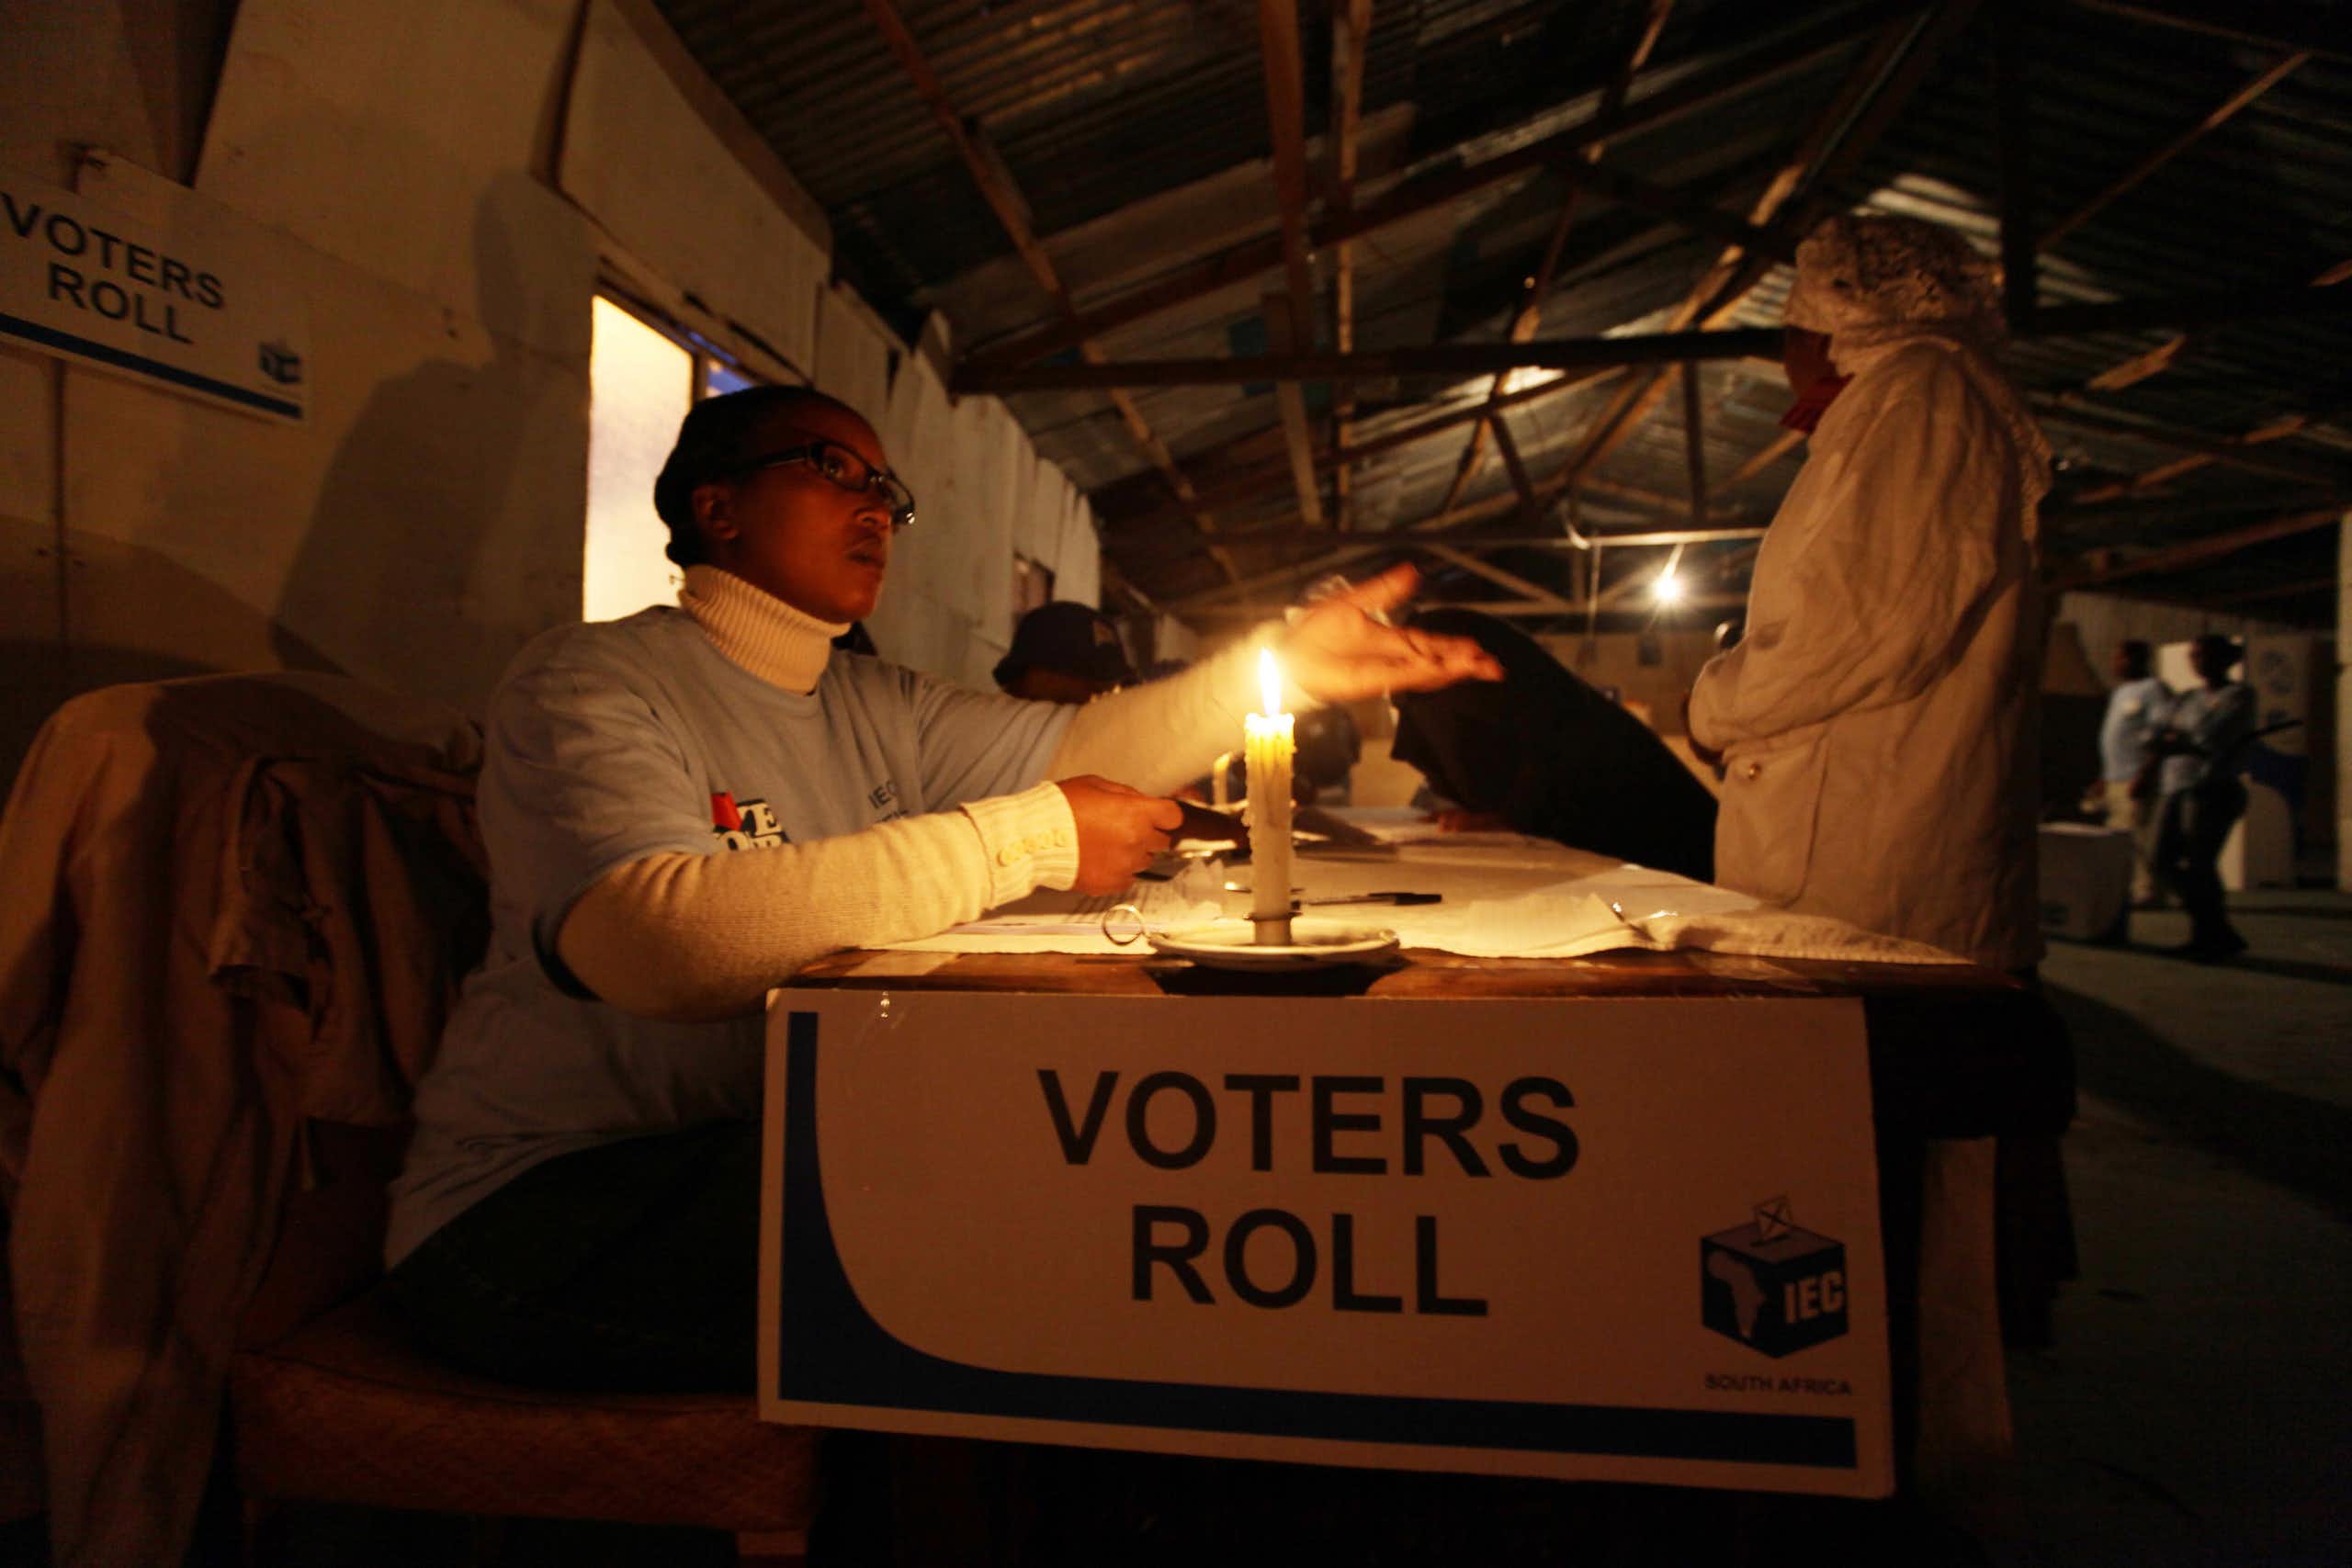 A voter casting a ballot at a voting table in the dark where there is only a candle